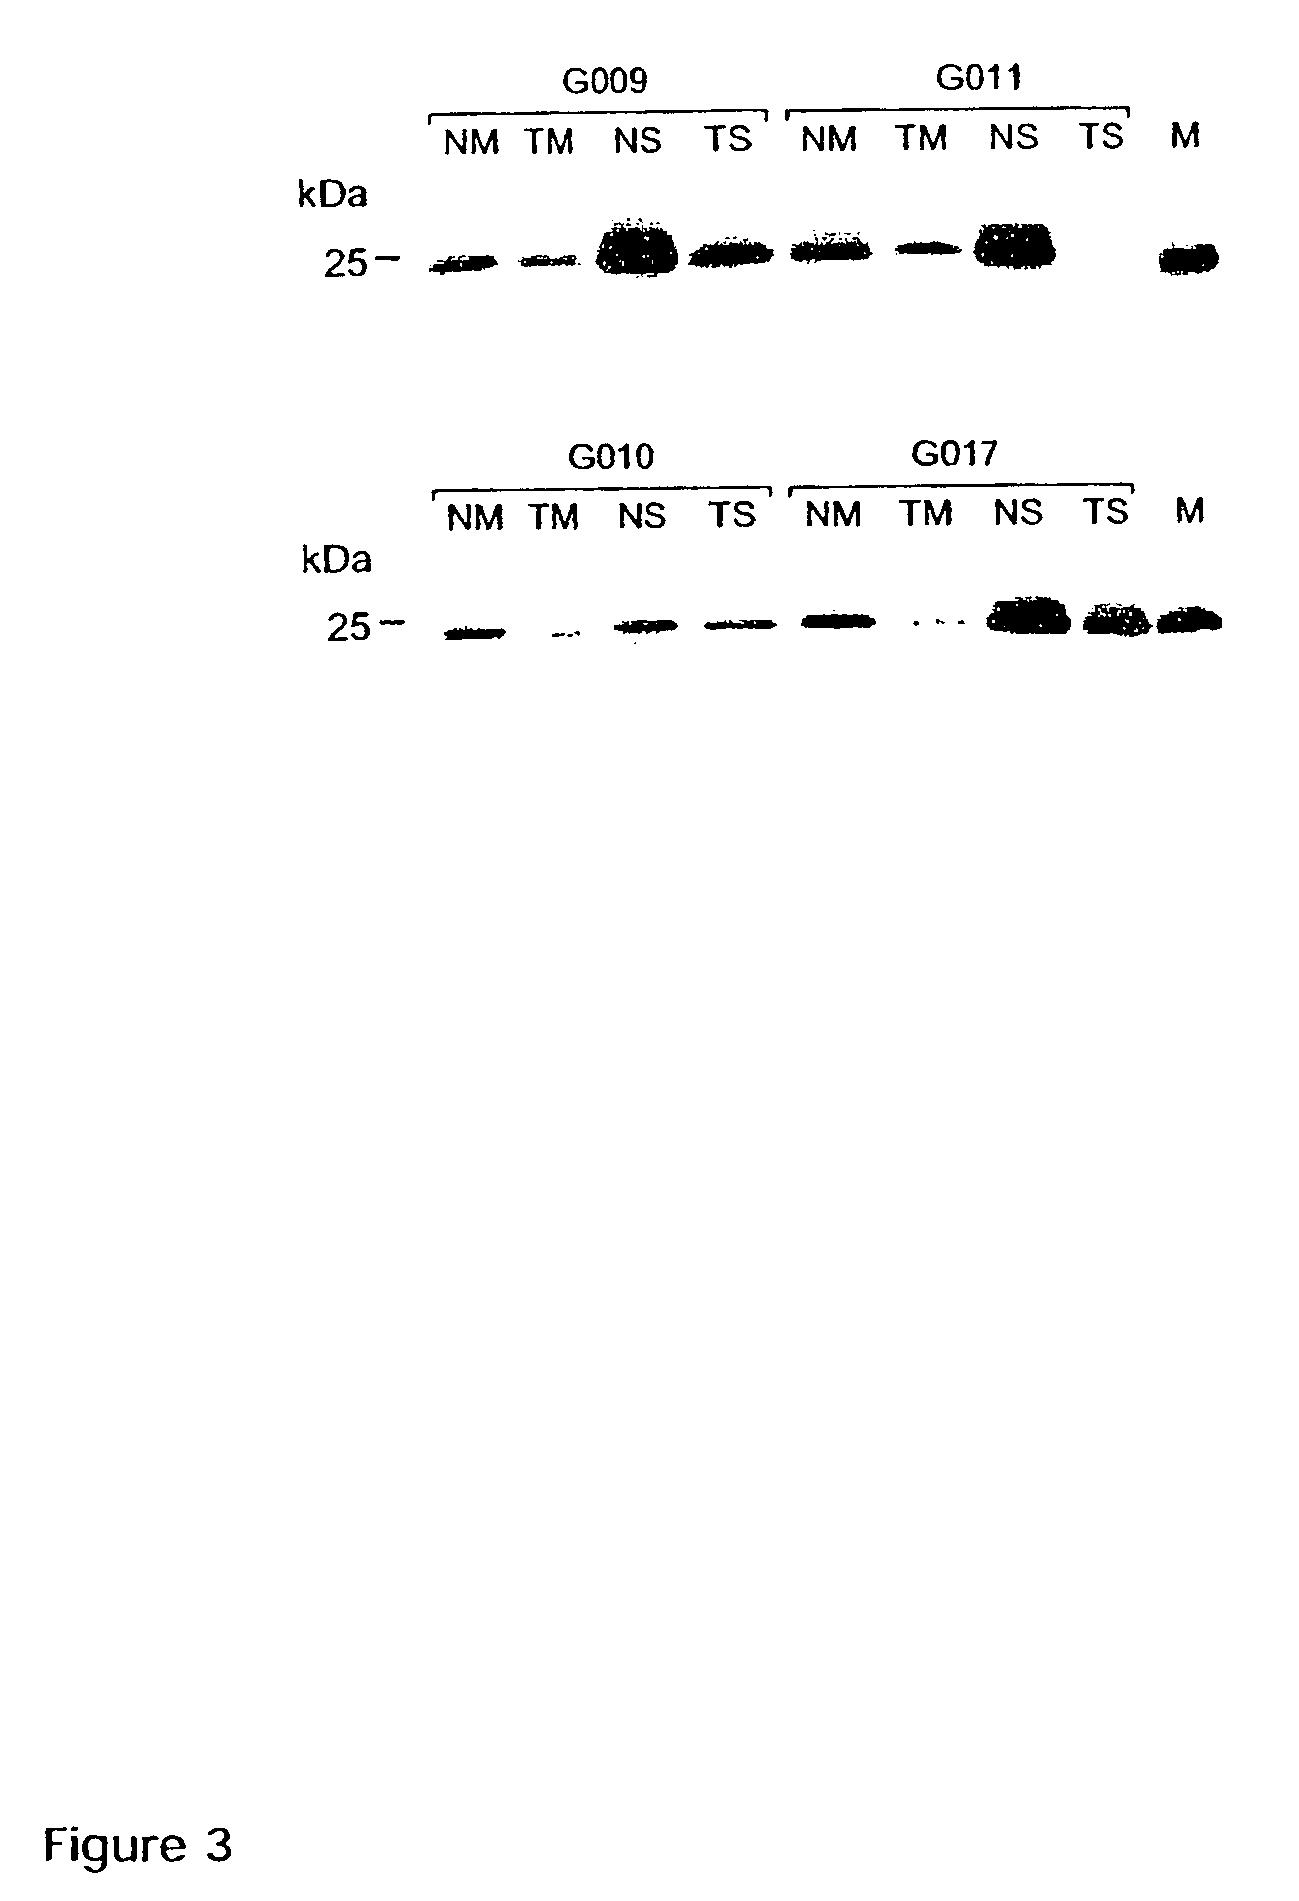 Caveolin-1 gene and polypeptide encoded thereby and methods of use thereof